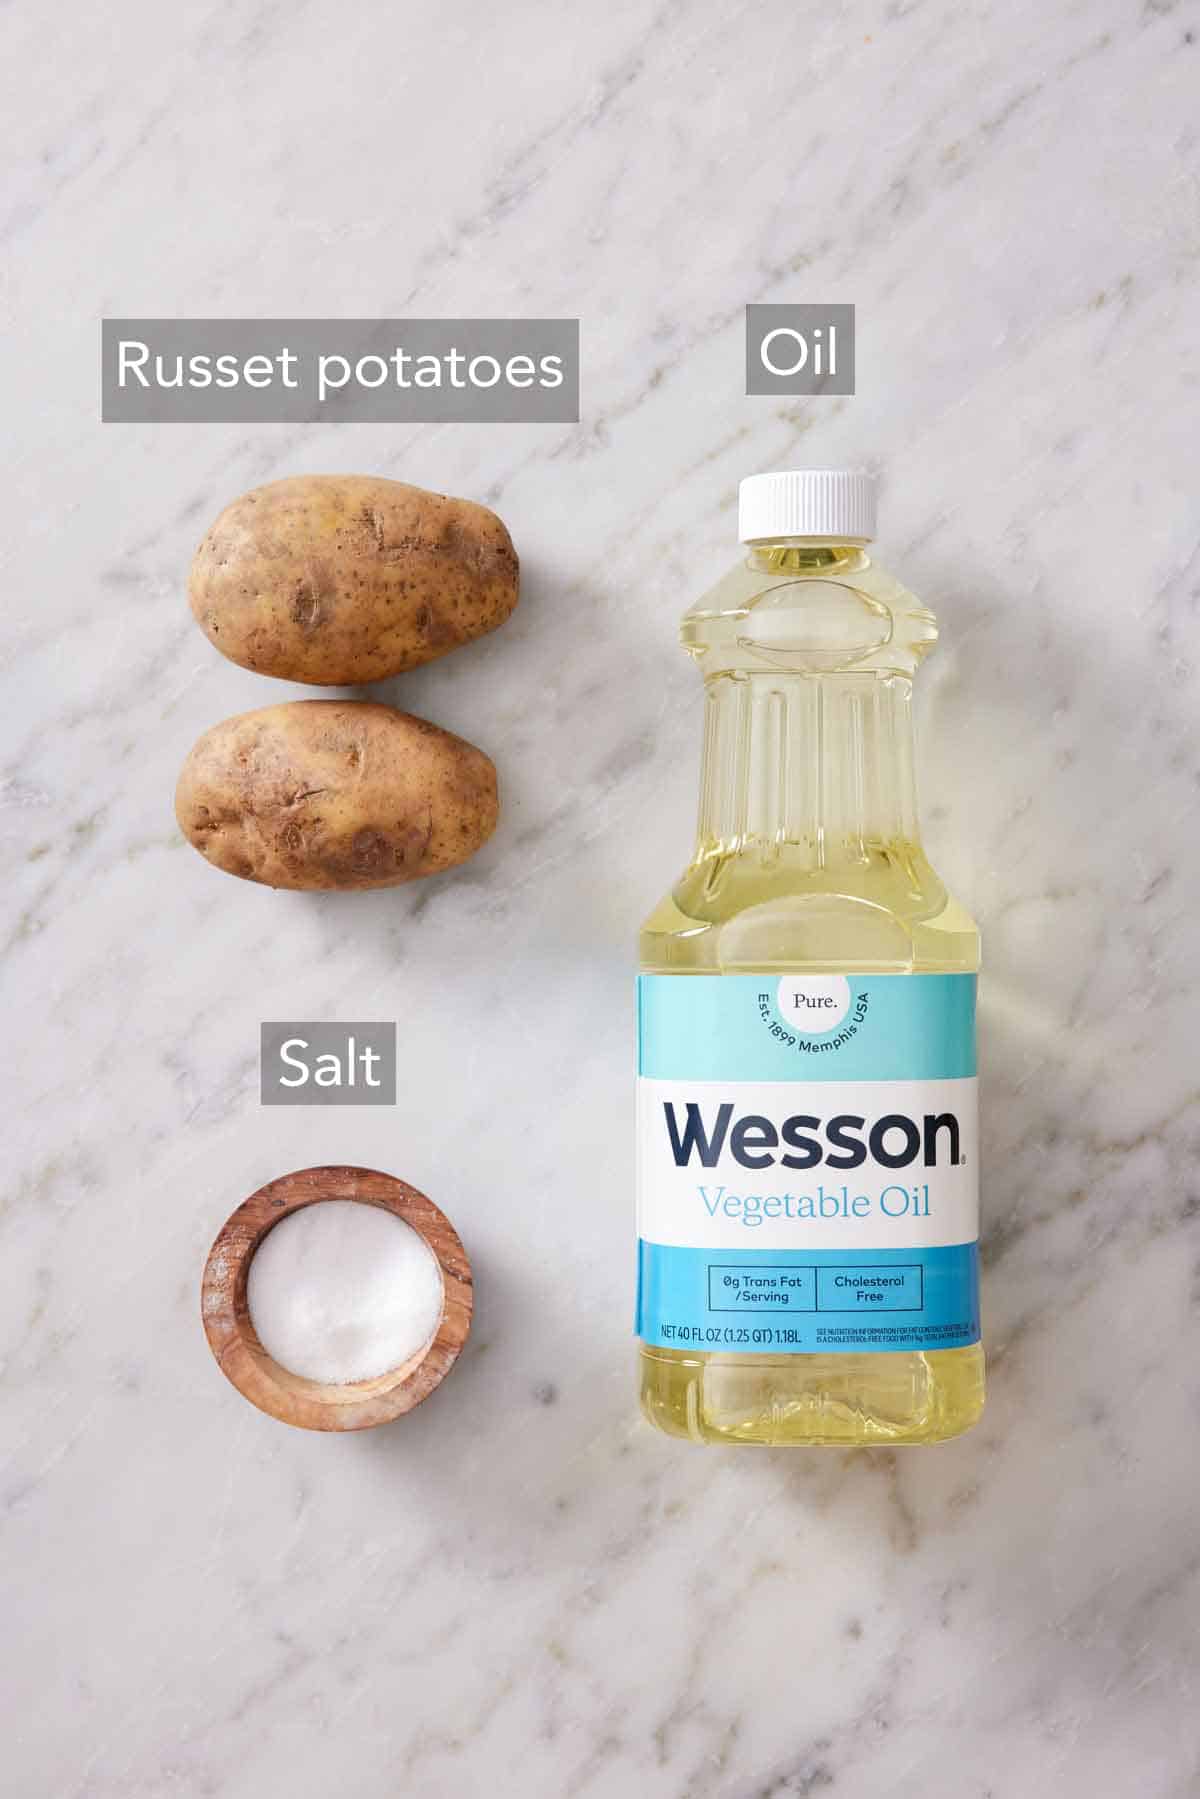 Ingredients needed to make homemade potato chips.